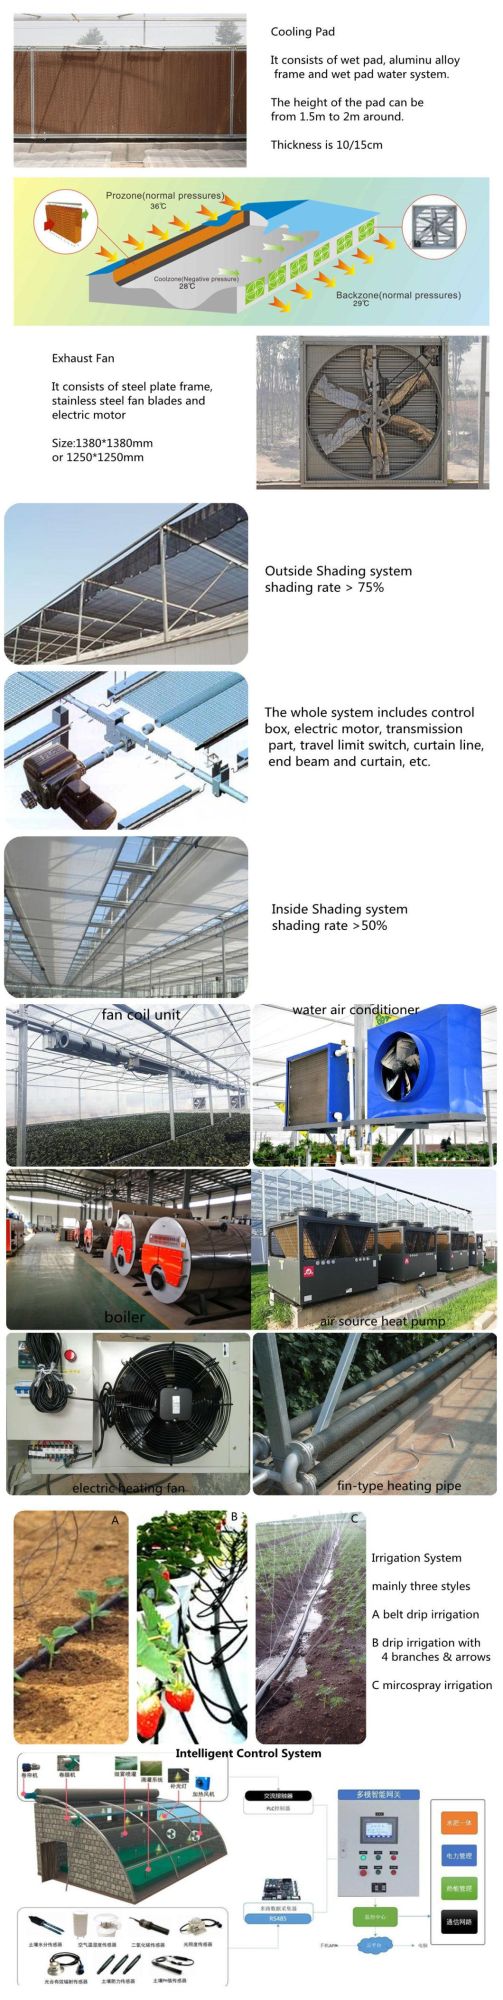 Sowing Machine Integrated Seedling Machine for Tray Seeds Dibbling/Sowing/Soil Covering for Modern Agriculture/Greenhouse Farming